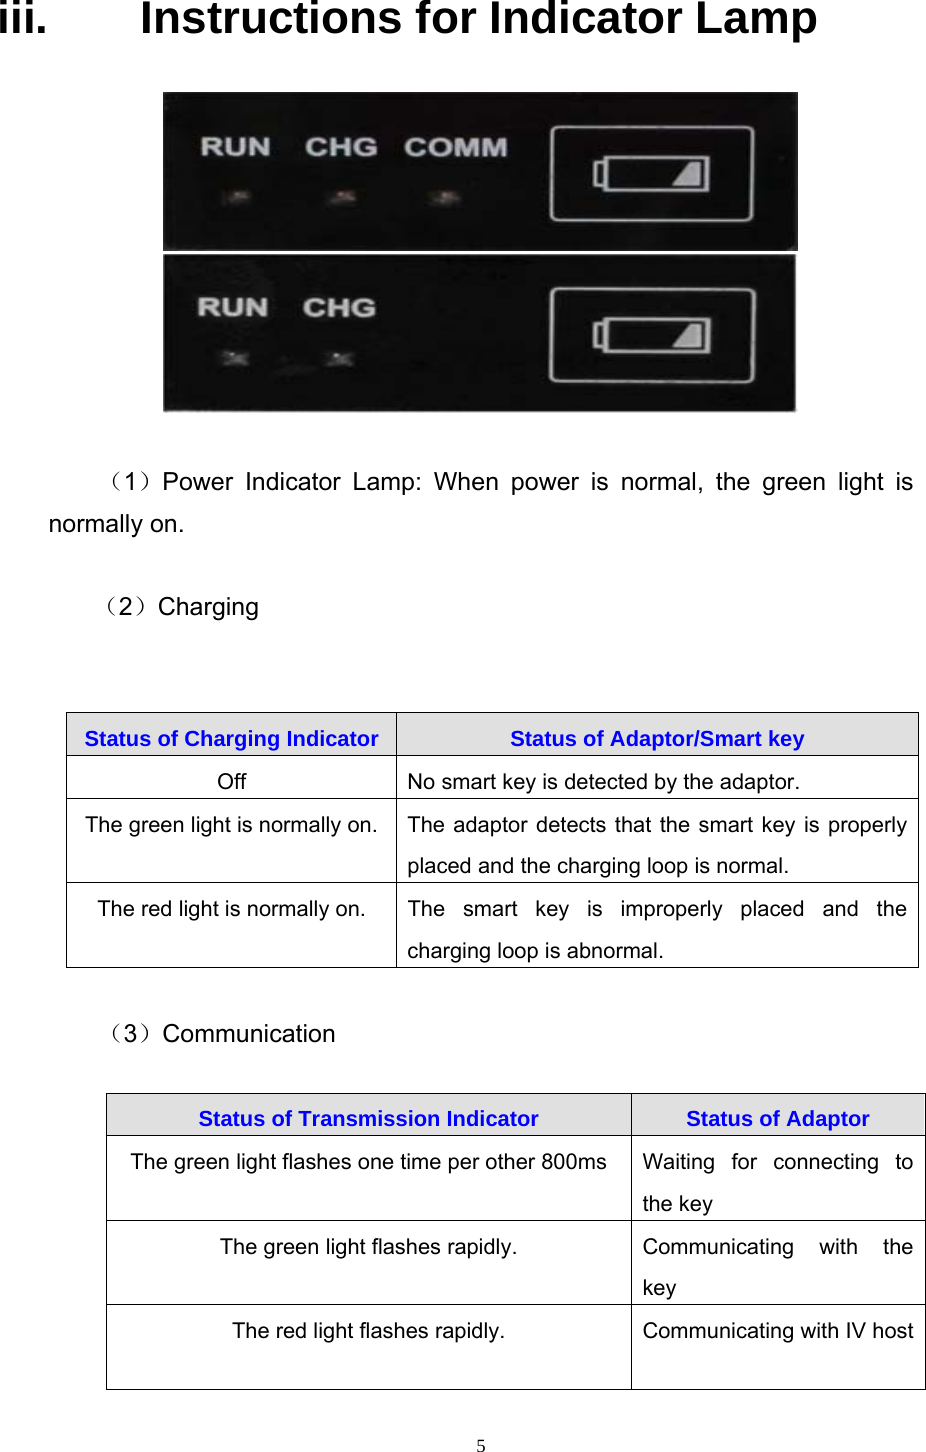 5  iii.  Instructions for Indicator Lamp    （1）Power Indicator Lamp: When power is normal, the green light is normally on.  （2）Charging    （3）Communication  Status of Transmission Indicator  Status of Adaptor The green light flashes one time per other 800ms  Waiting for connecting to the key The green light flashes rapidly.   Communicating with the key The red light flashes rapidly.  Communicating with IV host Status of Charging Indicator  Status of Adaptor/Smart key Off    No smart key is detected by the adaptor. The green light is normally on. The adaptor detects that the smart key is properly placed and the charging loop is normal.   The red light is normally on.  The  smart key is improperly placed and the charging loop is abnormal.   